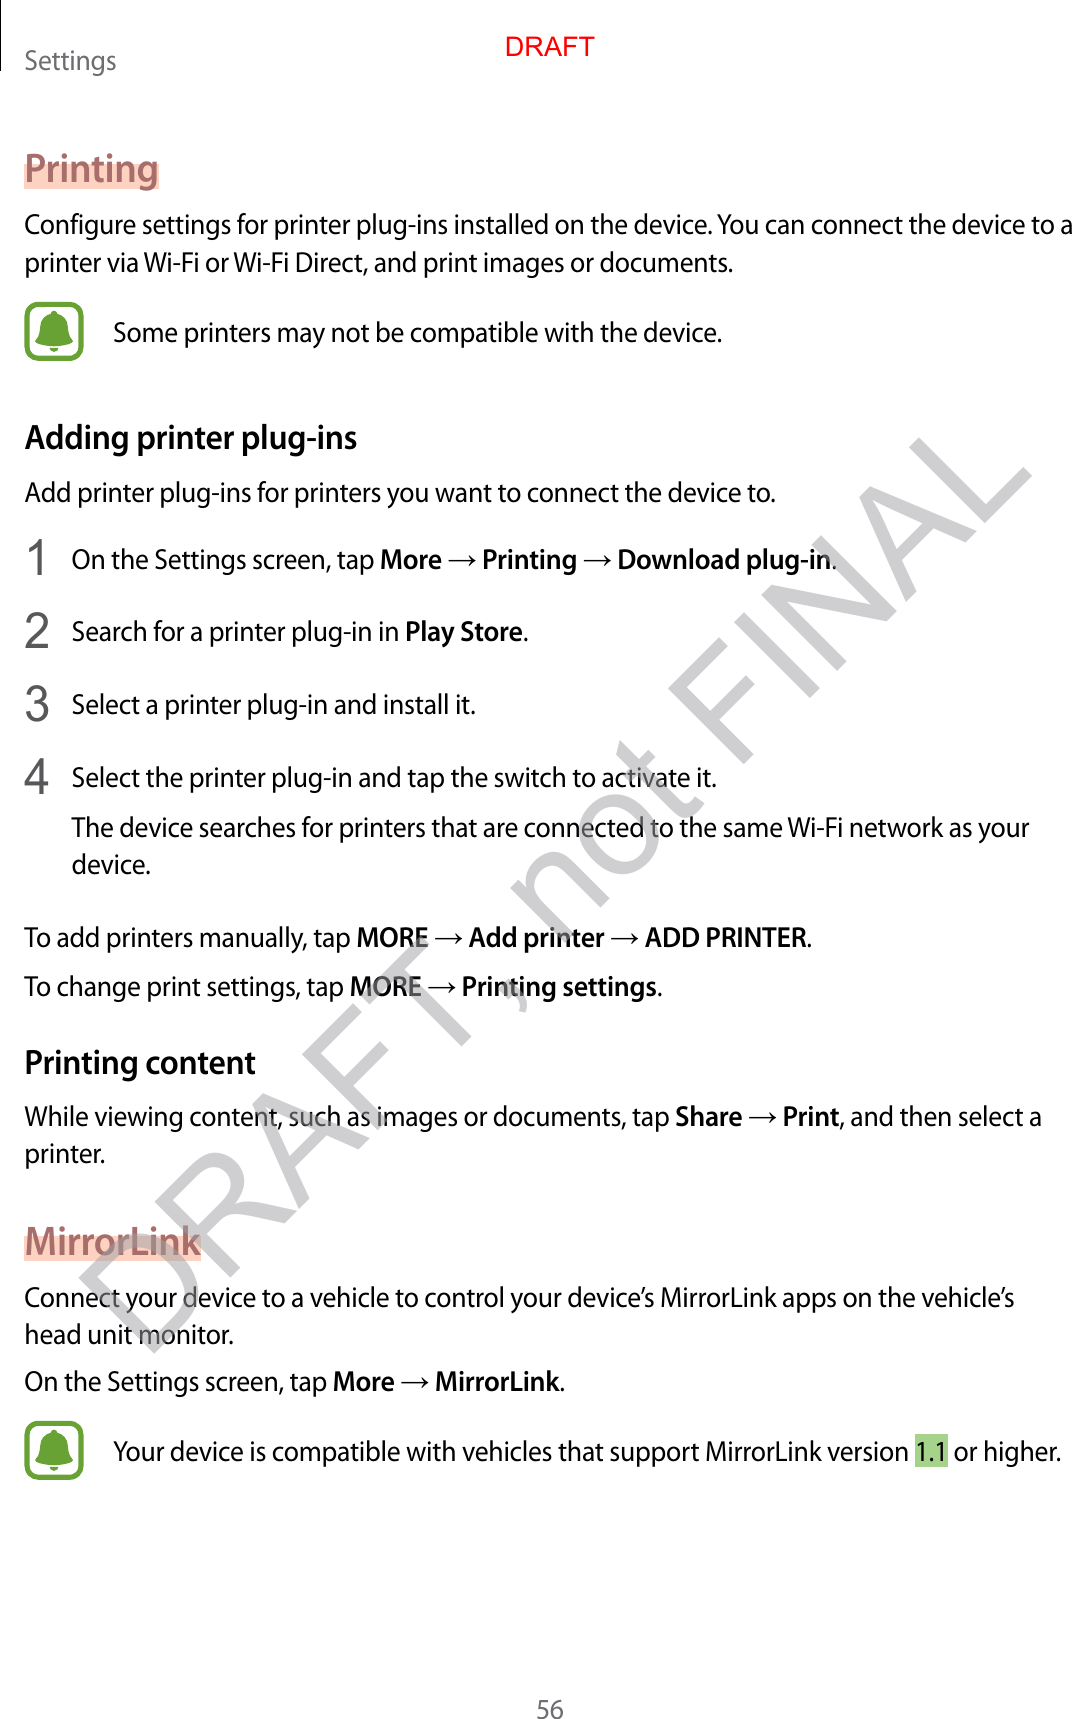 Settings56PrintingConfigur e settings f or print er plug-ins installed on the device. You can connect the device to a printer via Wi-Fi or  Wi-Fi Dir ect, and print images or documents .Some printers may not be compa tible with the device .Adding prin ter plug-insAdd print er plug-ins f or printers y ou w ant t o connect the device to.1  On the Settings screen, tap More → Printing → Download plug-in.2  Search for a print er plug-in in Play St or e.3  Select a printer plug-in and install it.4  Select the printer plug-in and tap the switch t o activate it.The device sear ches f or print ers that ar e c onnected to the same Wi-Fi network as y our device.To add printers manually, tap MORE → Add prin ter → ADD PRINTER.To change print settings, tap MORE → Printing settings.Prin ting c ont entWhile viewing cont ent , such as images or documents , tap Share → Print, and then select a printer.MirrorLinkConnect your device t o a v ehicle to c ontr ol y our devic e’s MirrorLink apps on the vehicle’s head unit monitor.On the Settings screen, tap More → MirrorLink.Your device is compatible with vehicles that support MirrorLink v ersion 1.1 or higher.DRAFT, not FINALDRAFT